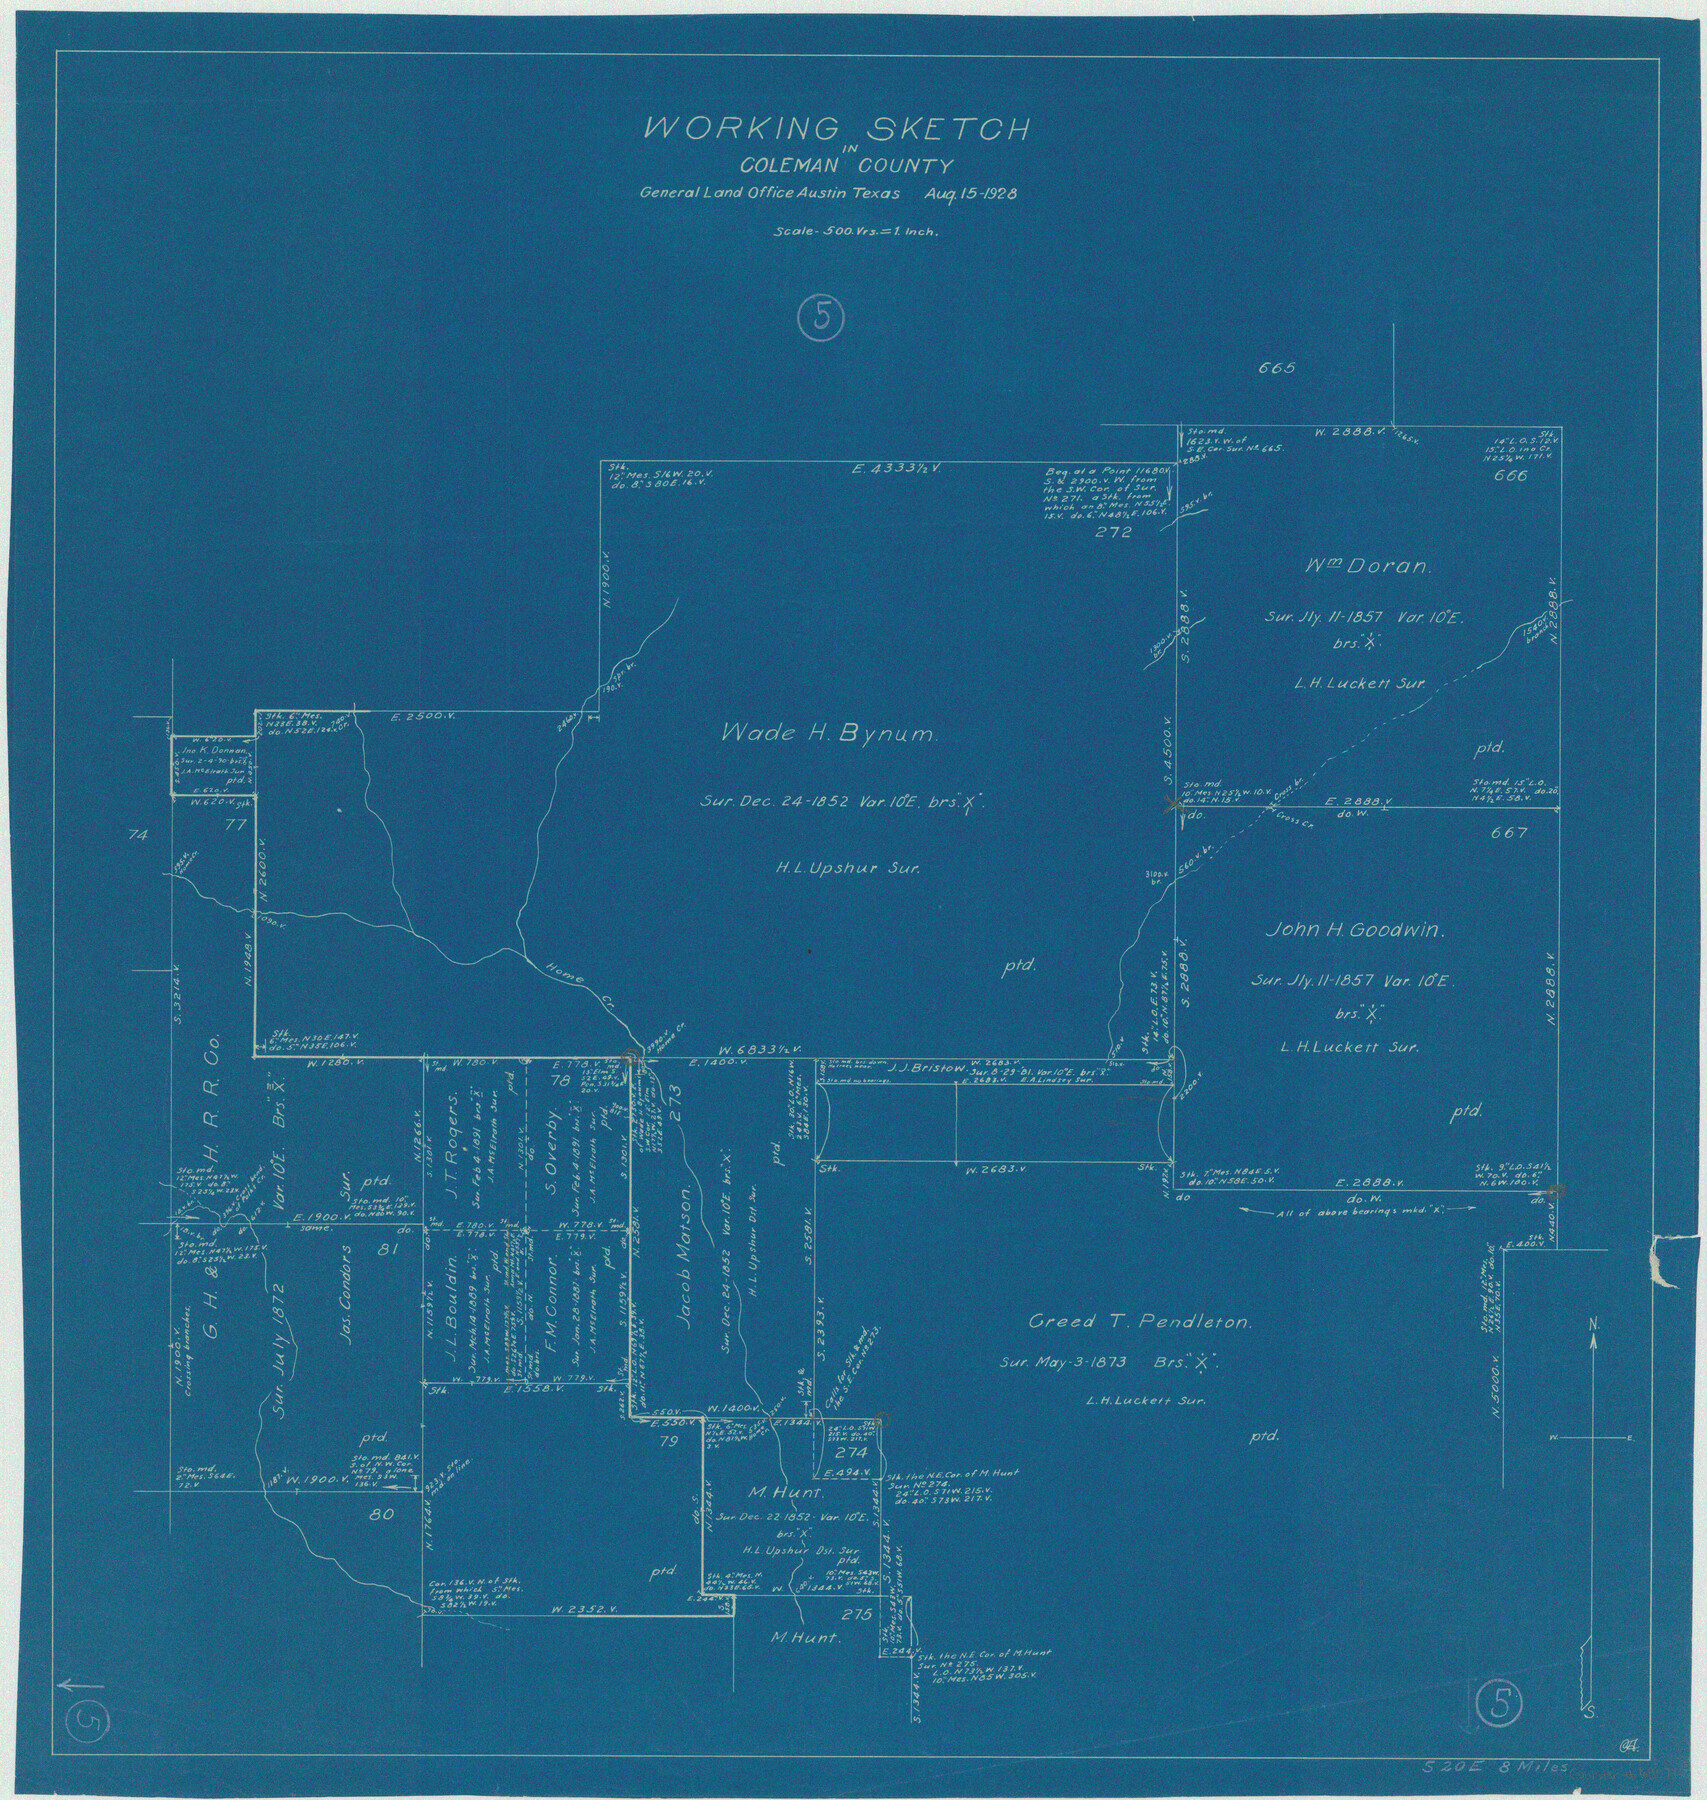 68071, Coleman County Working Sketch 5, General Map Collection